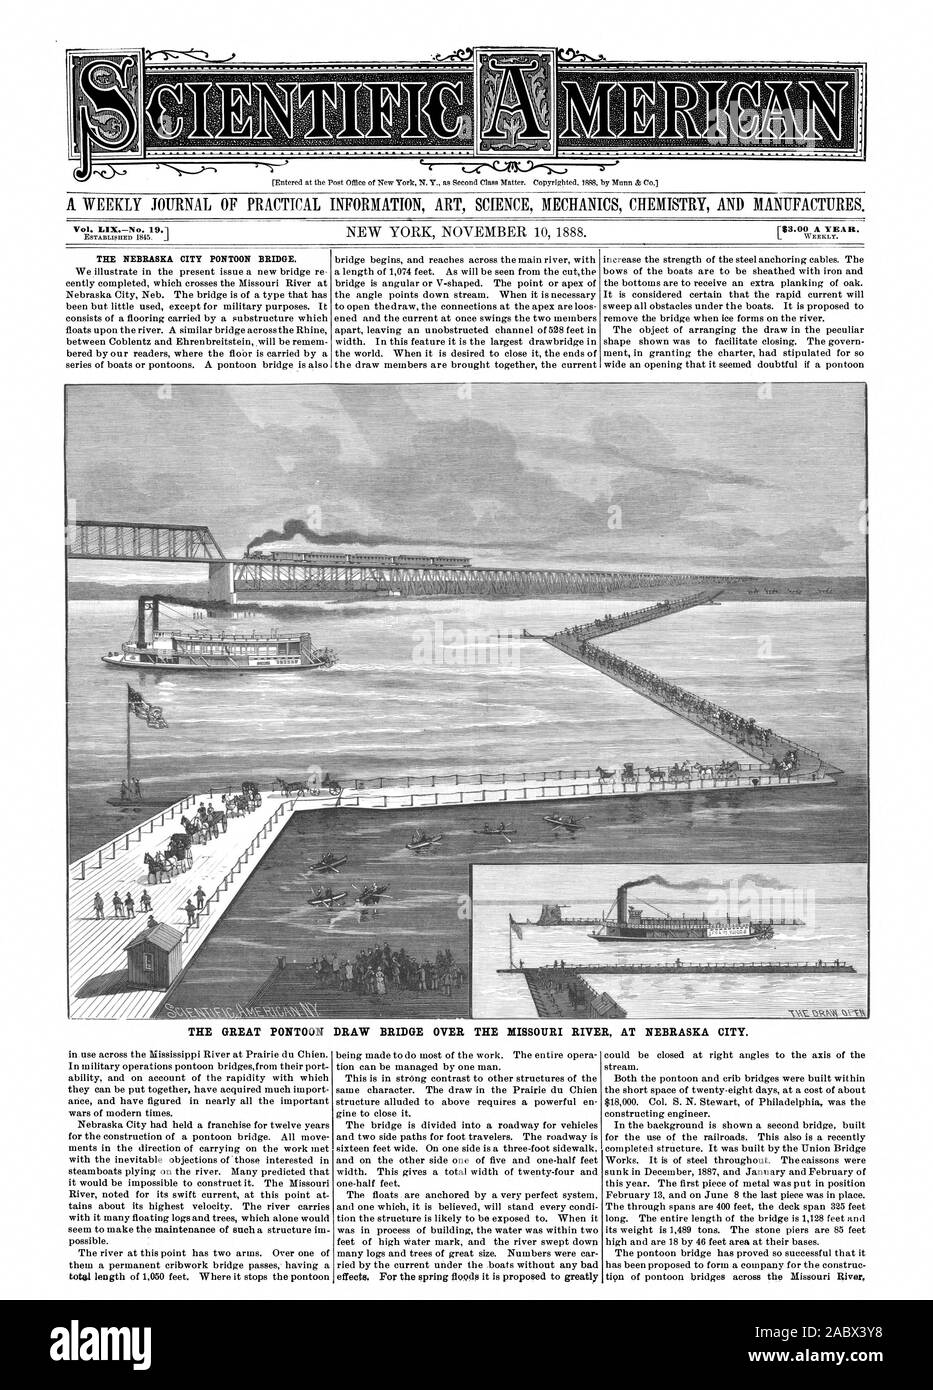 The through spans are 400 feet the deck span 325 feet long. The entire length of the bridge is 1128 feet and its weight is 1489 tons. The stone piers are 85 feet The pontoon bridge has proved so successful that it has been proposed to form a company for the construc-, scientific american, 1888-11-10 Stock Photo